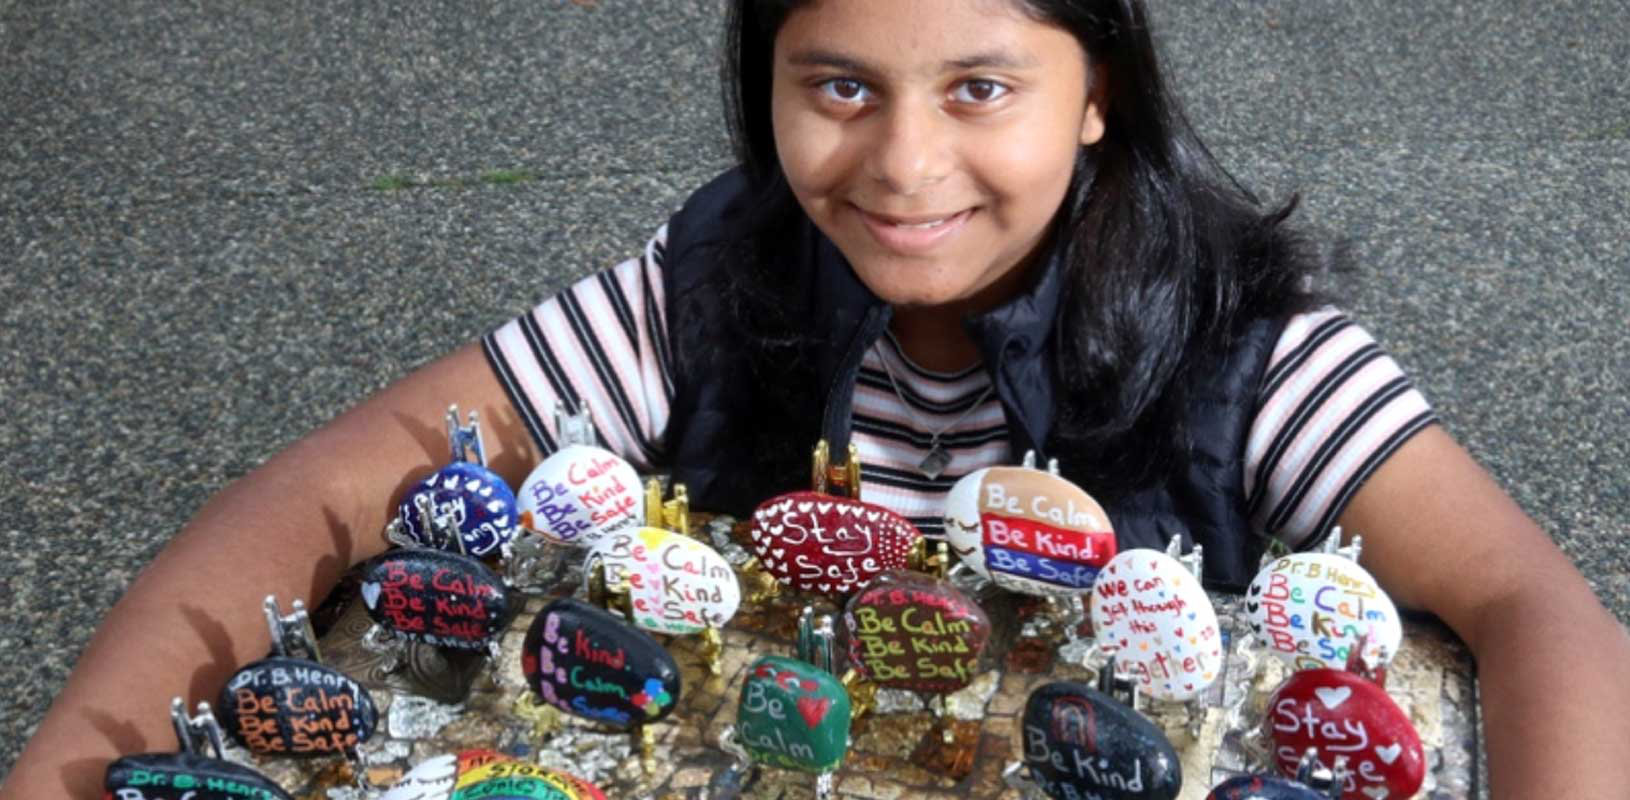 Insiyah Dharsee of the 13th Southwest Ismaili Group shows her display of inspiring Hope Rocks.